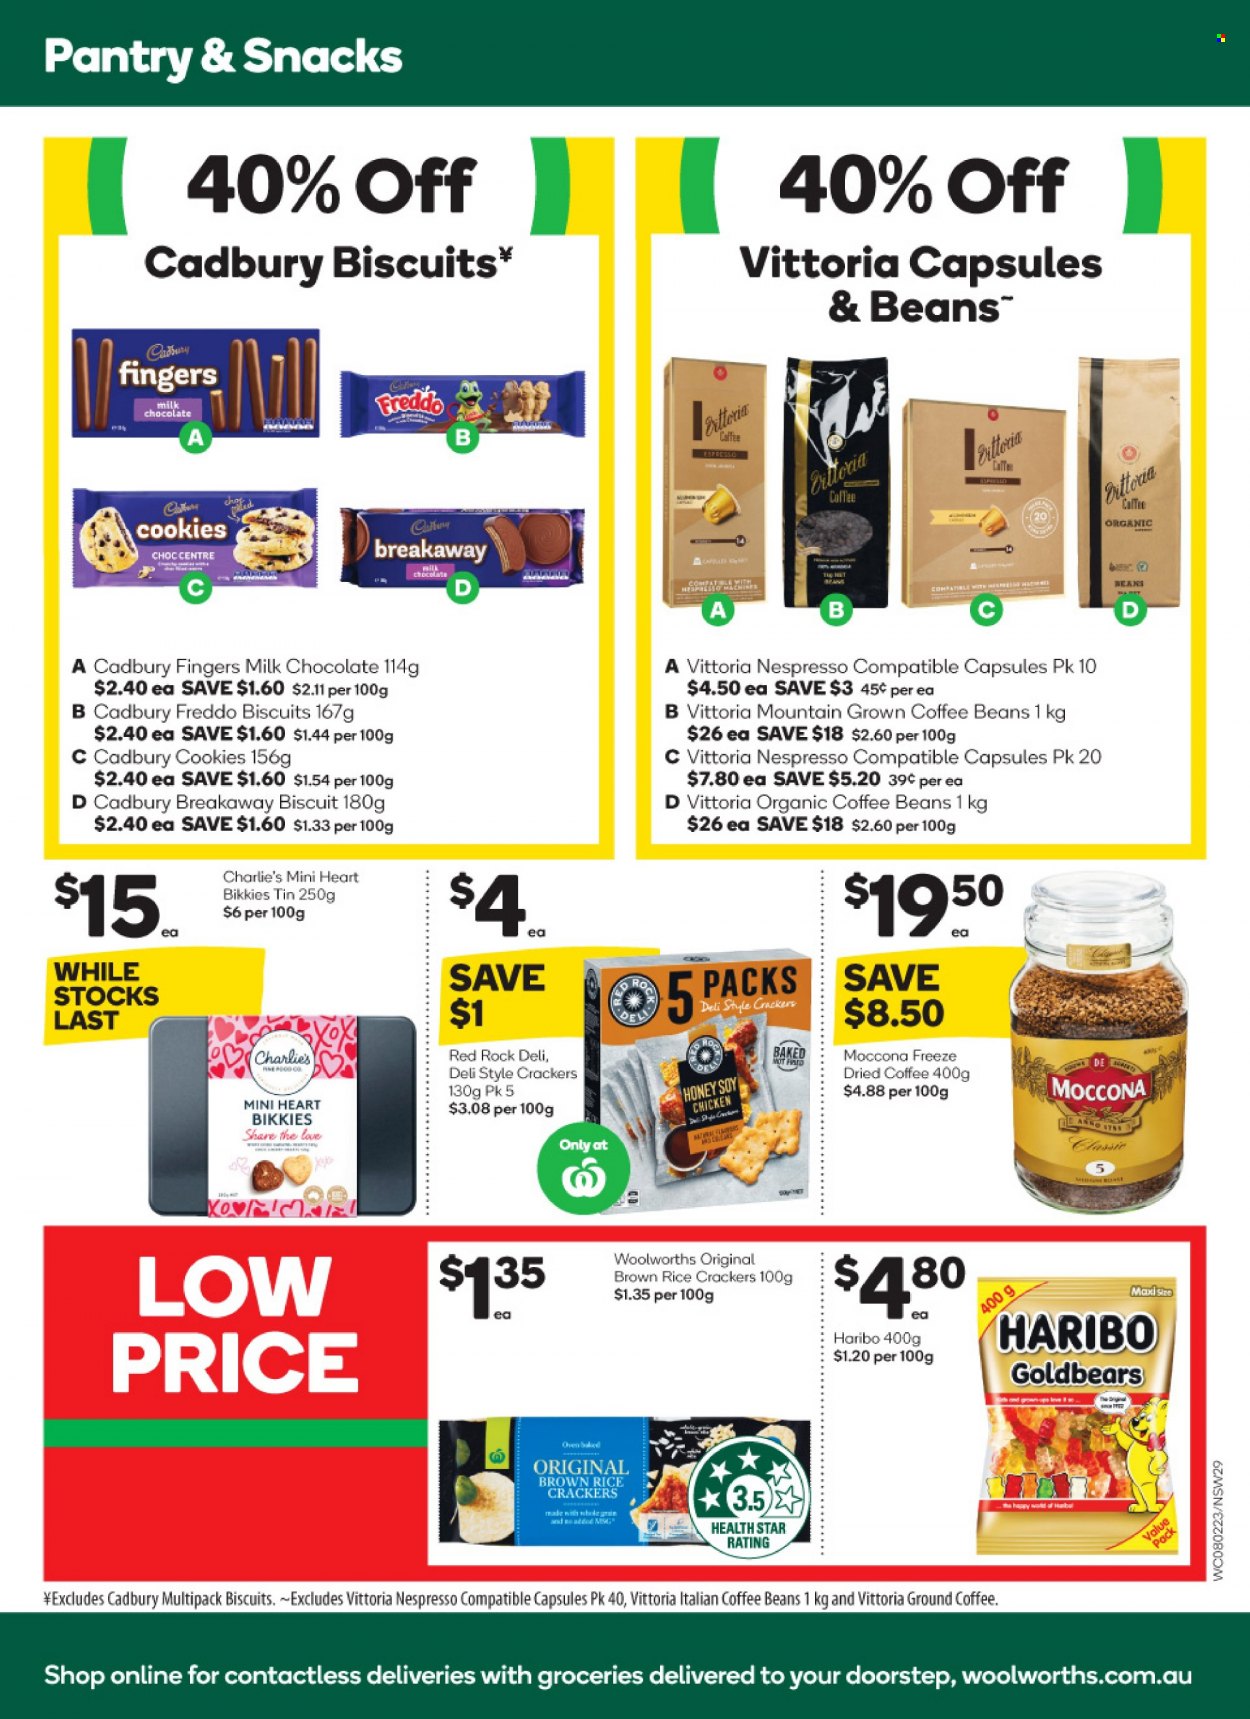 thumbnail - Woolworths Catalogue - 8 Feb 2023 - 14 Feb 2023 - Sales products - cookies, milk chocolate, chocolate, snack, Haribo, crackers, biscuit, Cadbury, rice crackers, brown rice, honey, coffee beans, Nespresso, organic coffee, ground coffee, Moccona. Page 29.